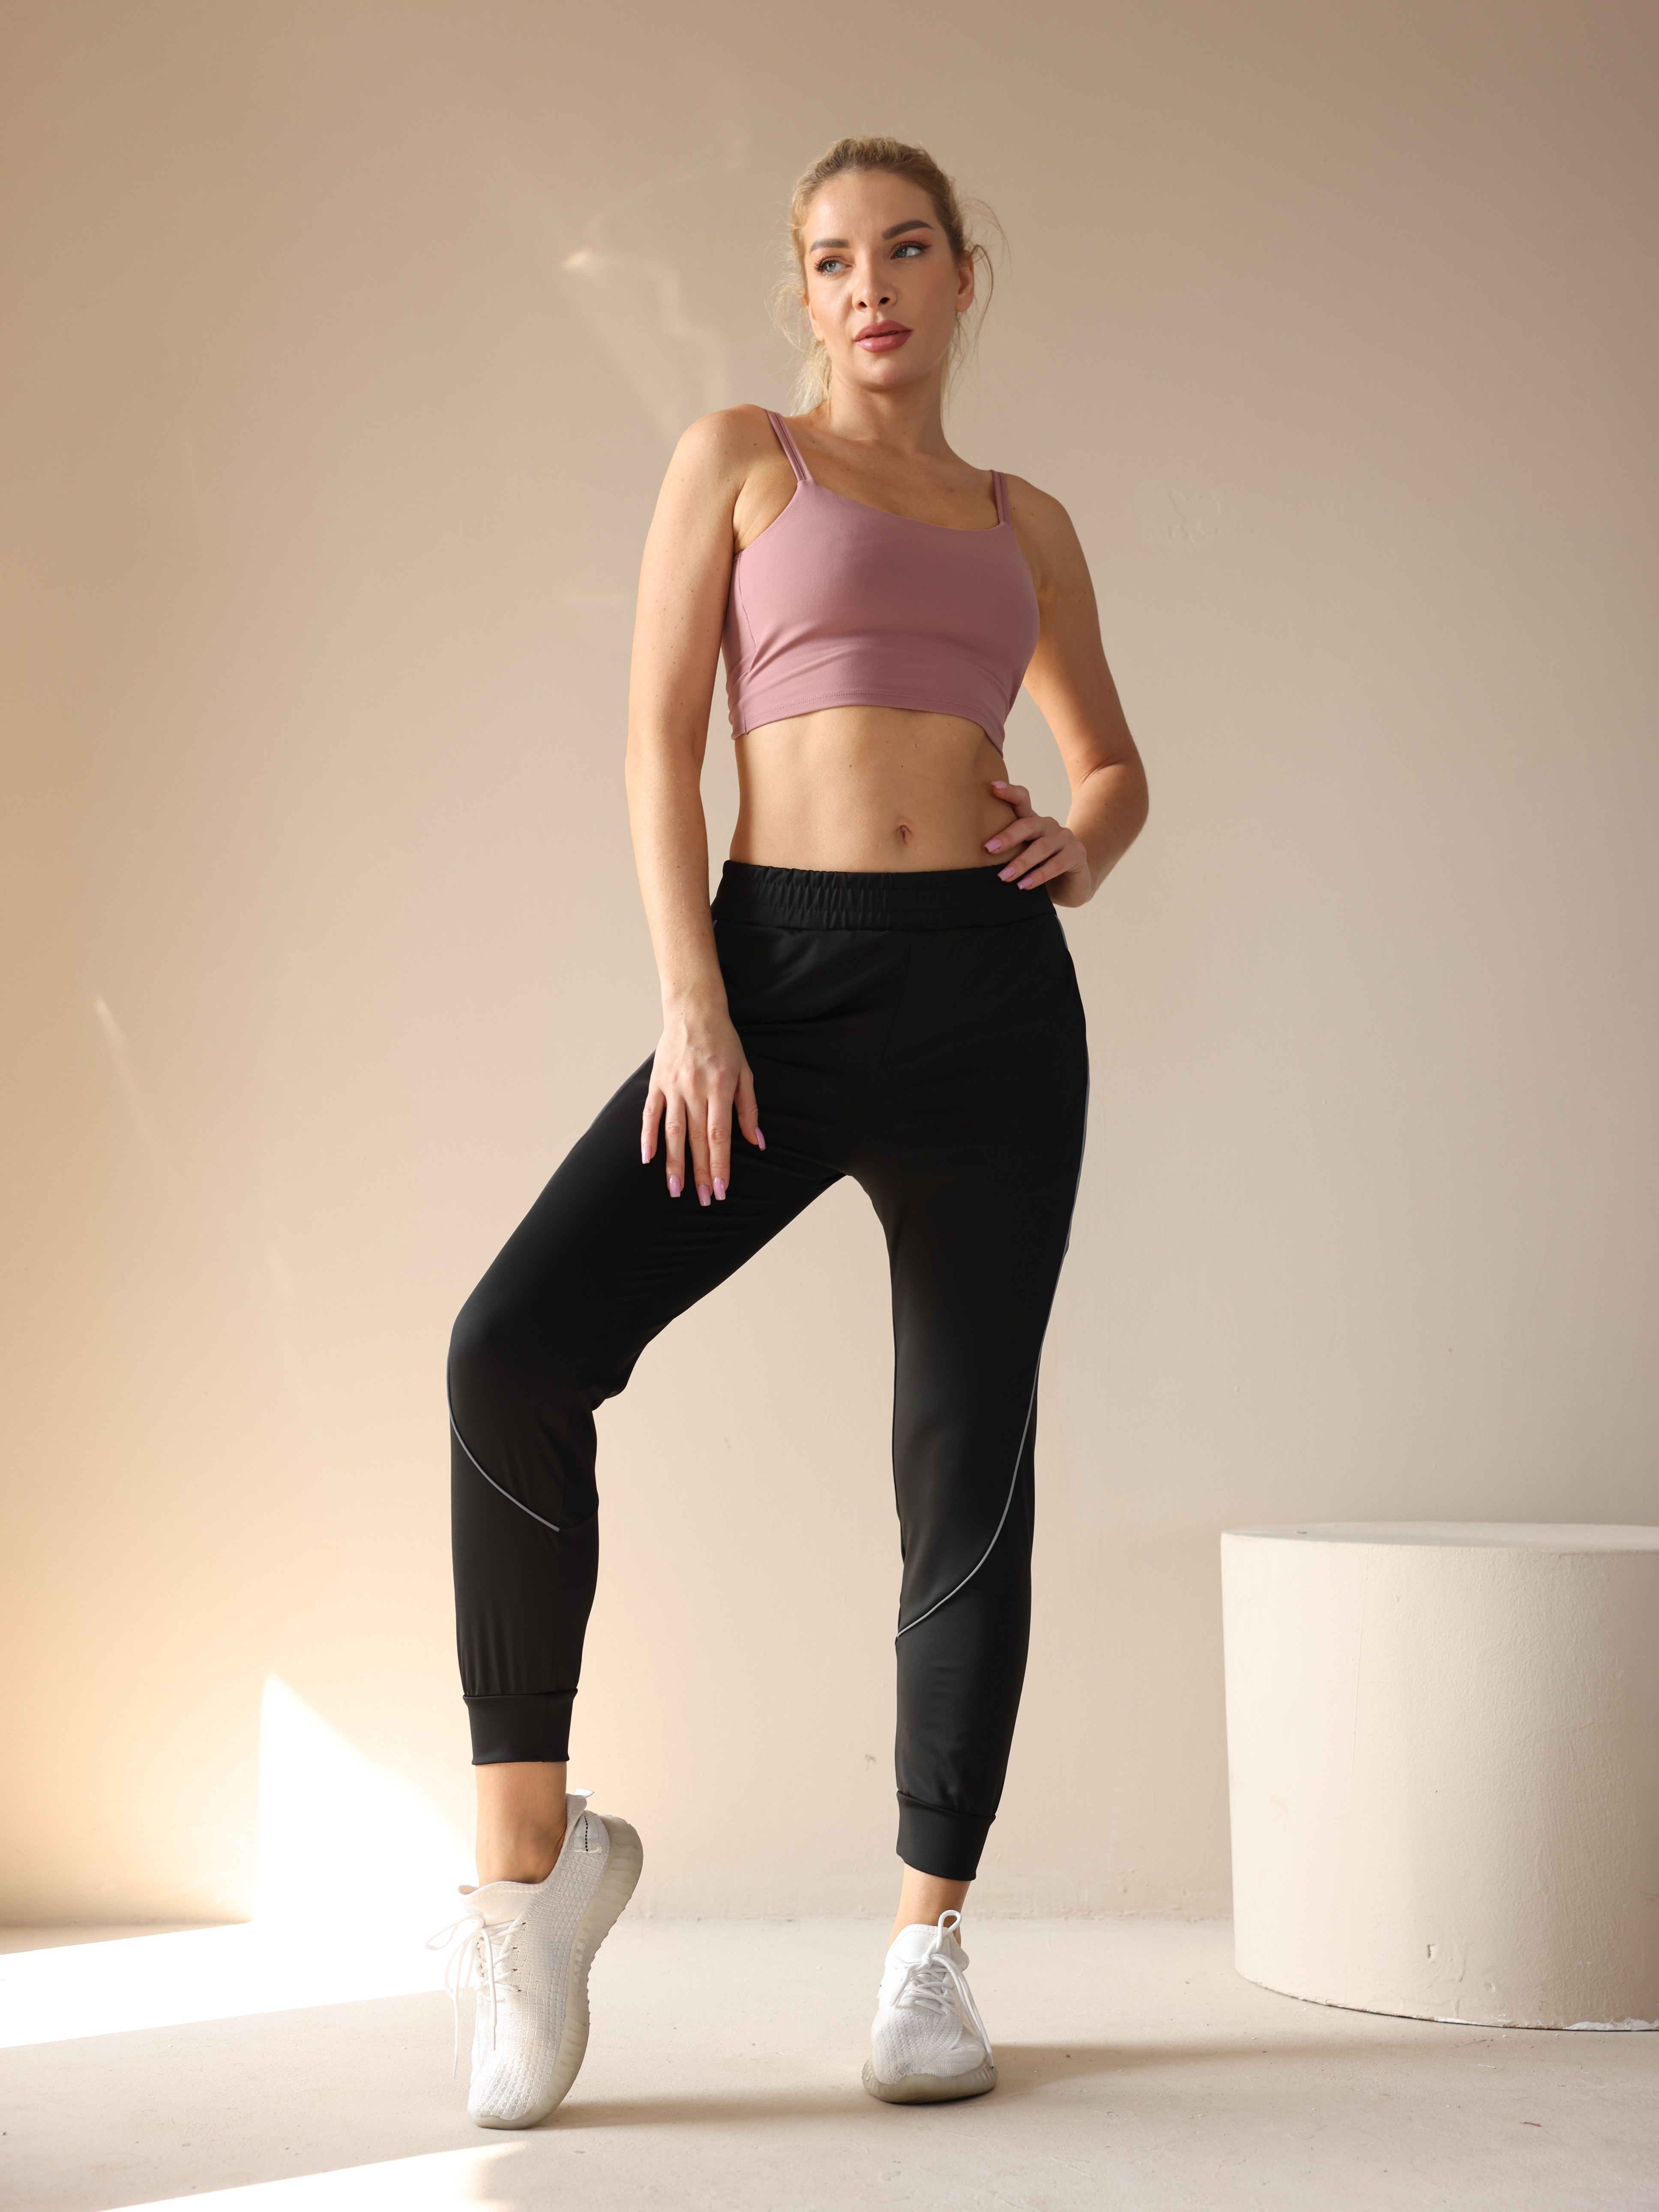 Reflective High Waist Jogger Pants for Women - Perfect for Night Running  and Fitness Workouts